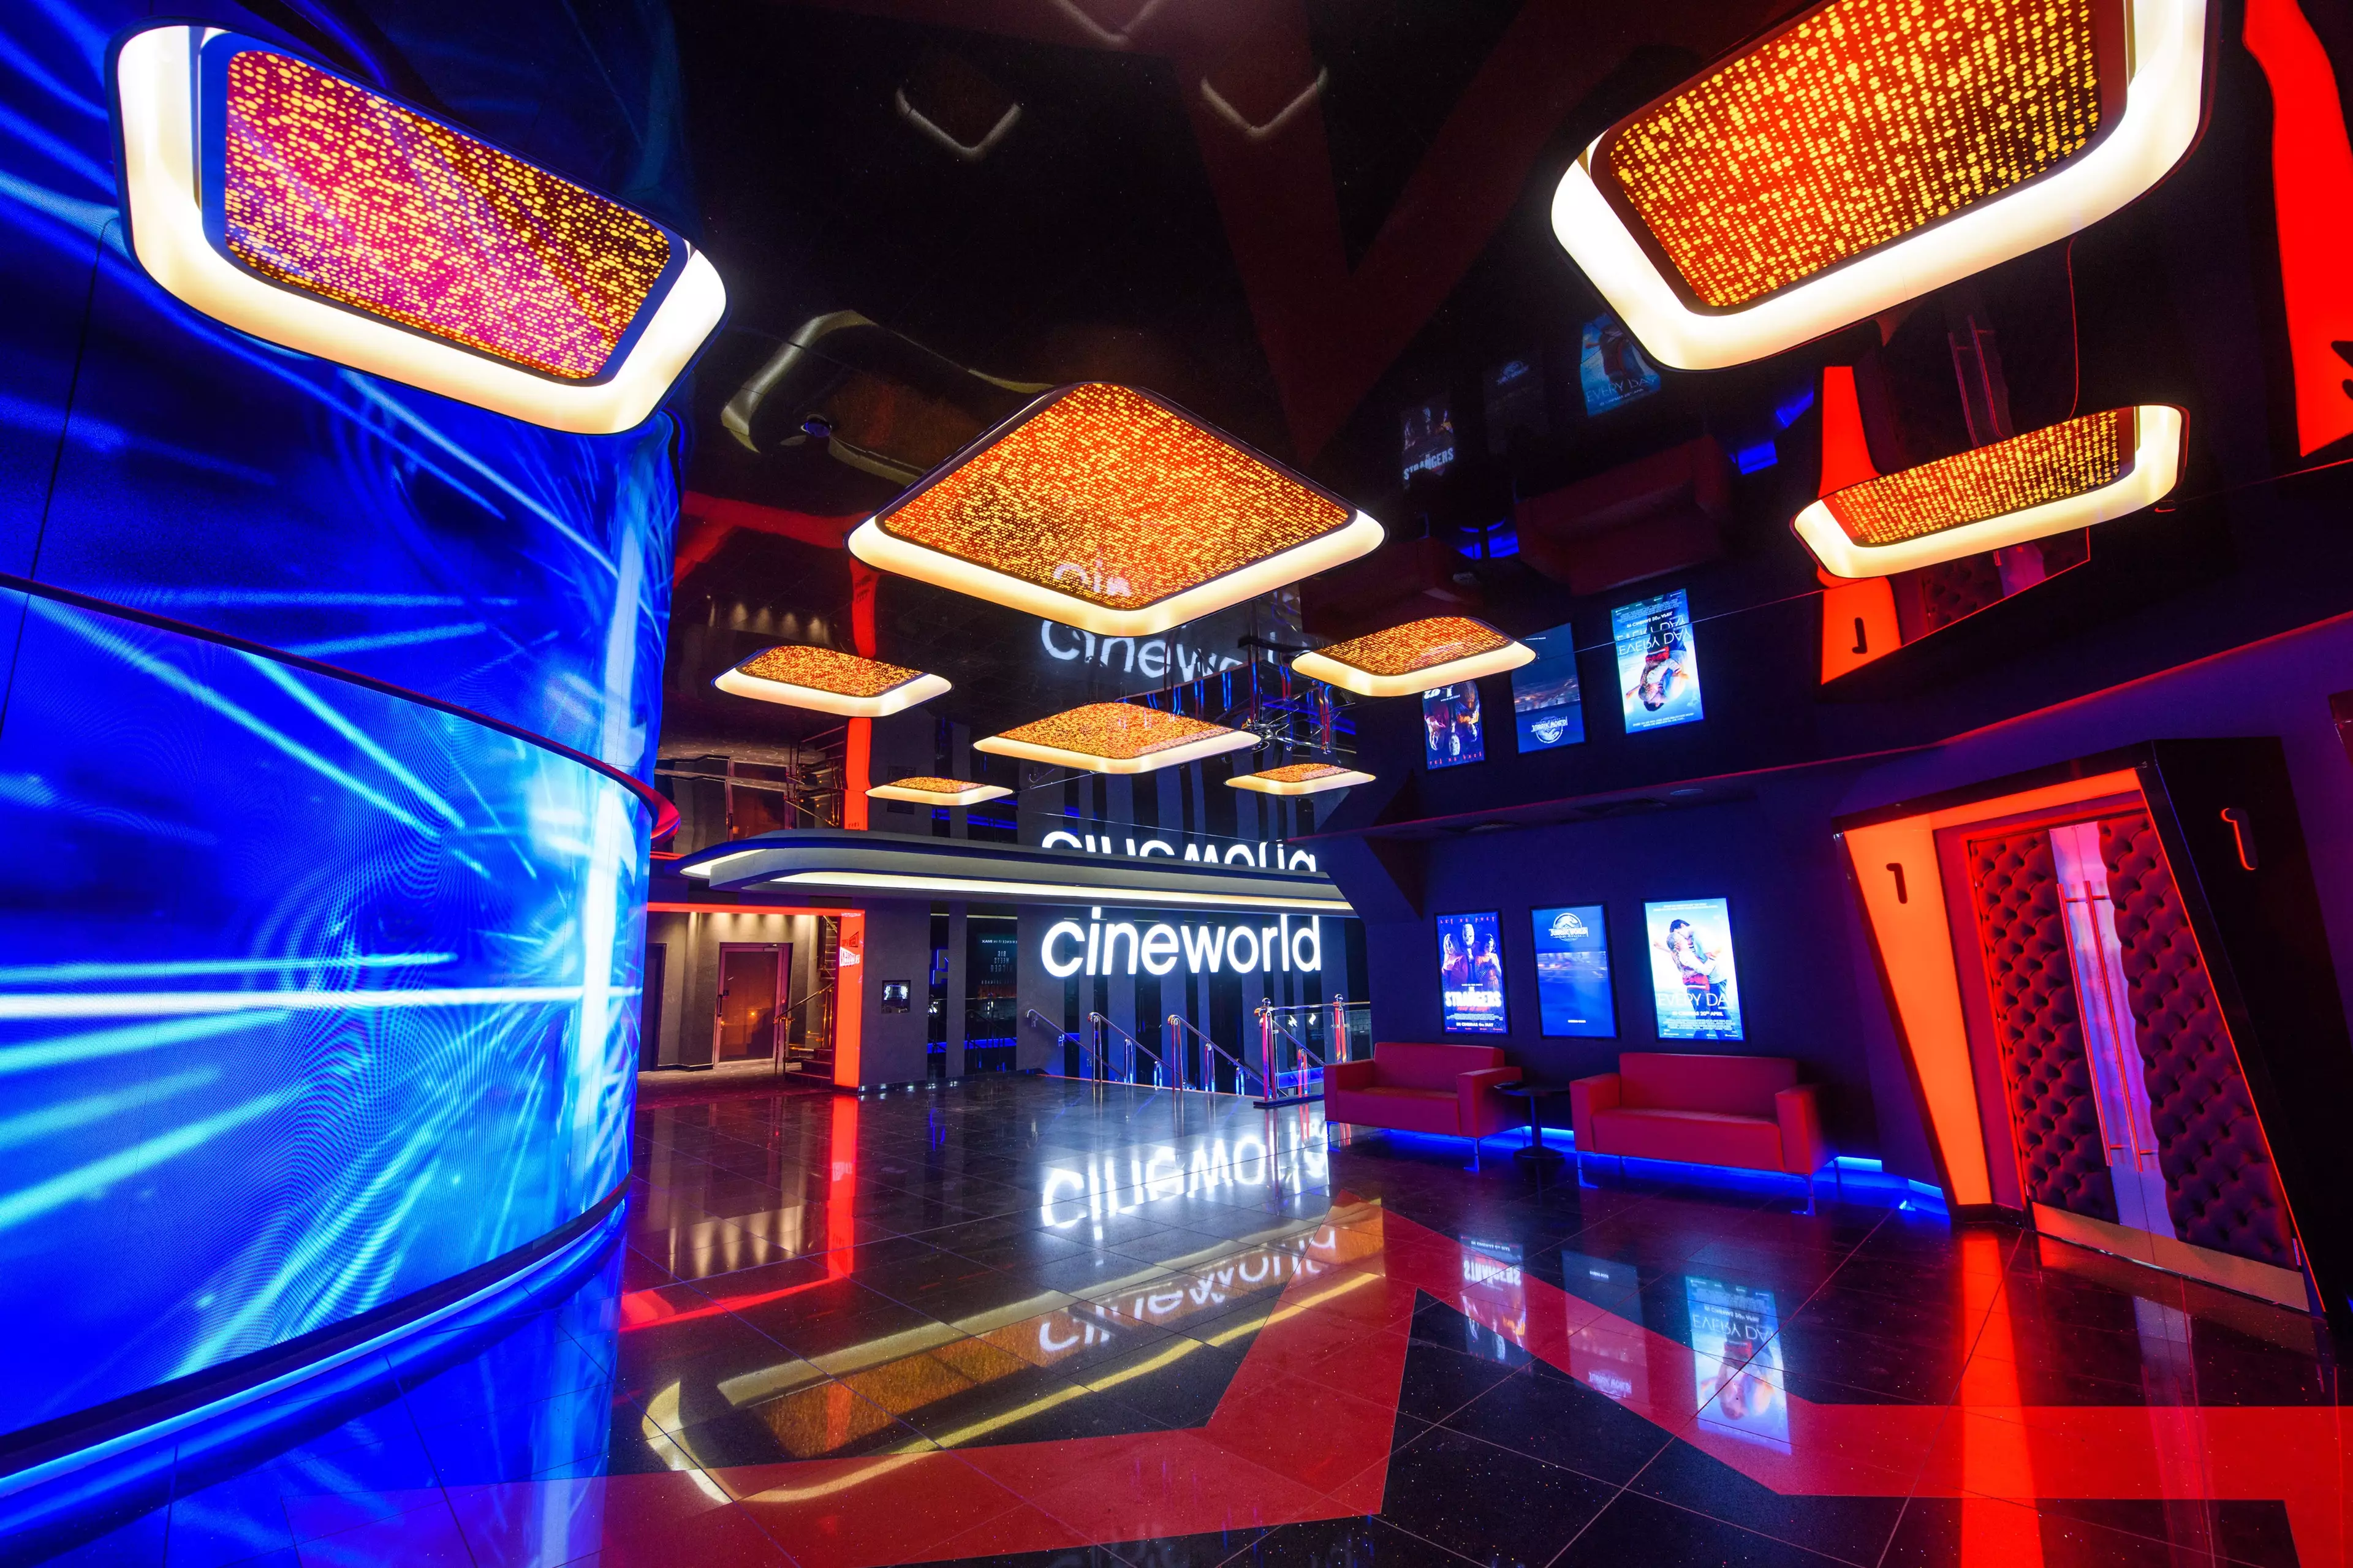 Cineworld is expected to open on 17th May (